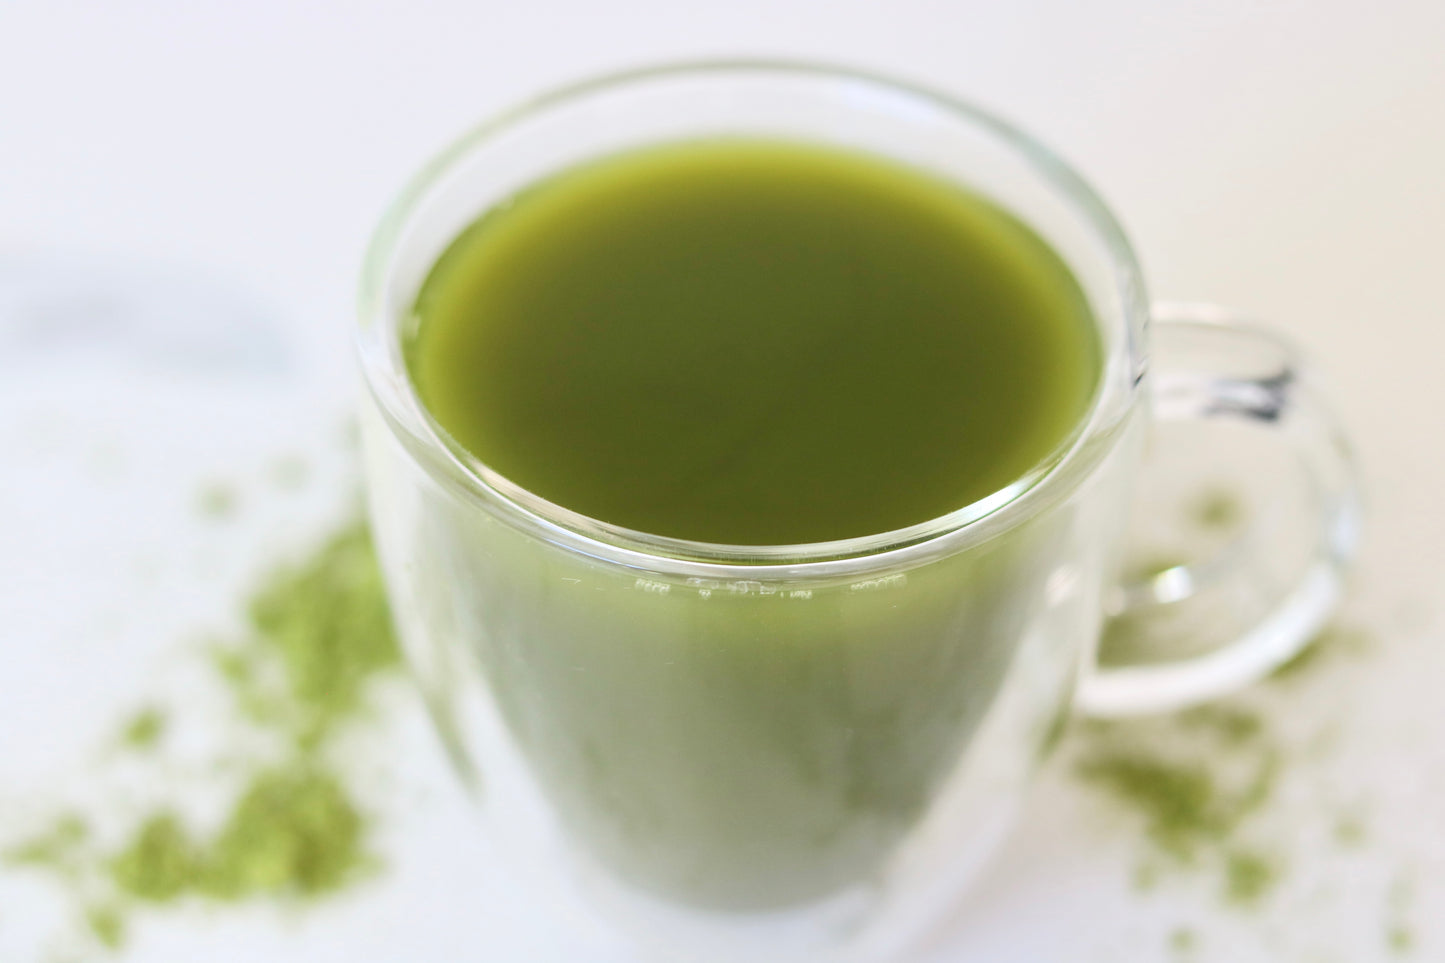 ACTIVATE: Organically Grown Japanese Green Matcha